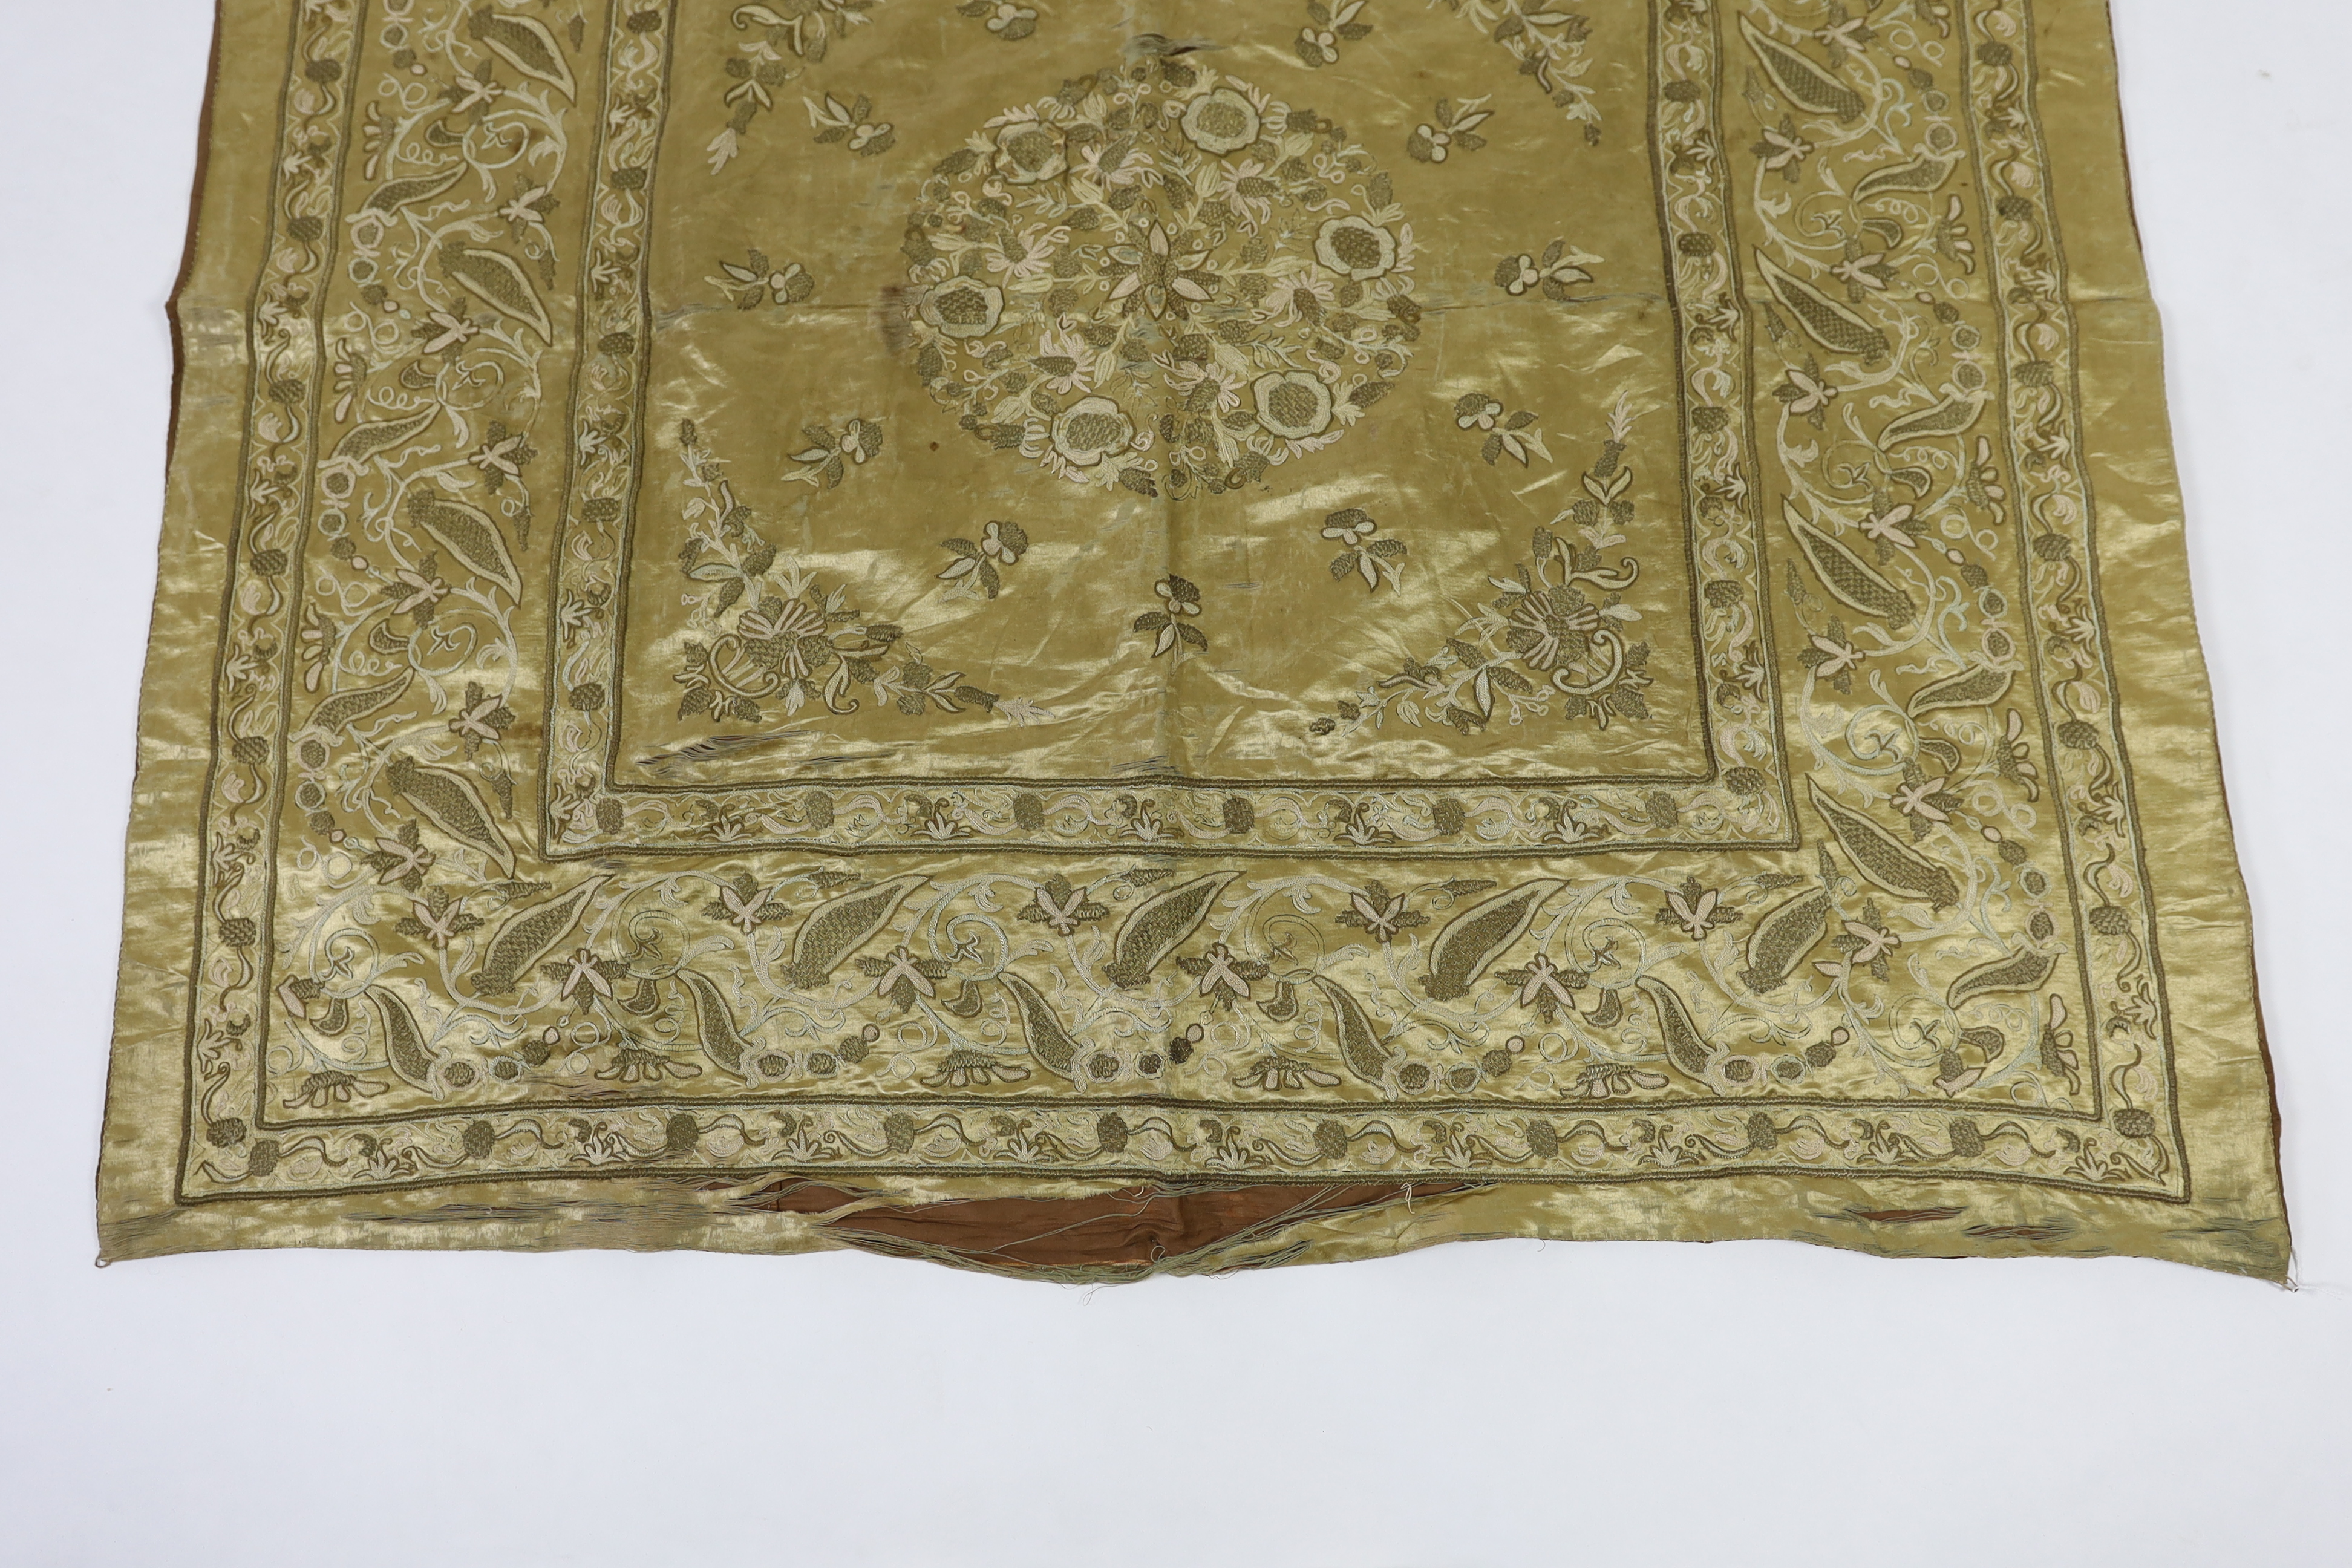 A late 19th century Turkish metallic thread and chain stitch silk satin cover, embroidered with a central cartouche of flowers and print, with rows of various borders with similar embroidery, 123 x 116cm